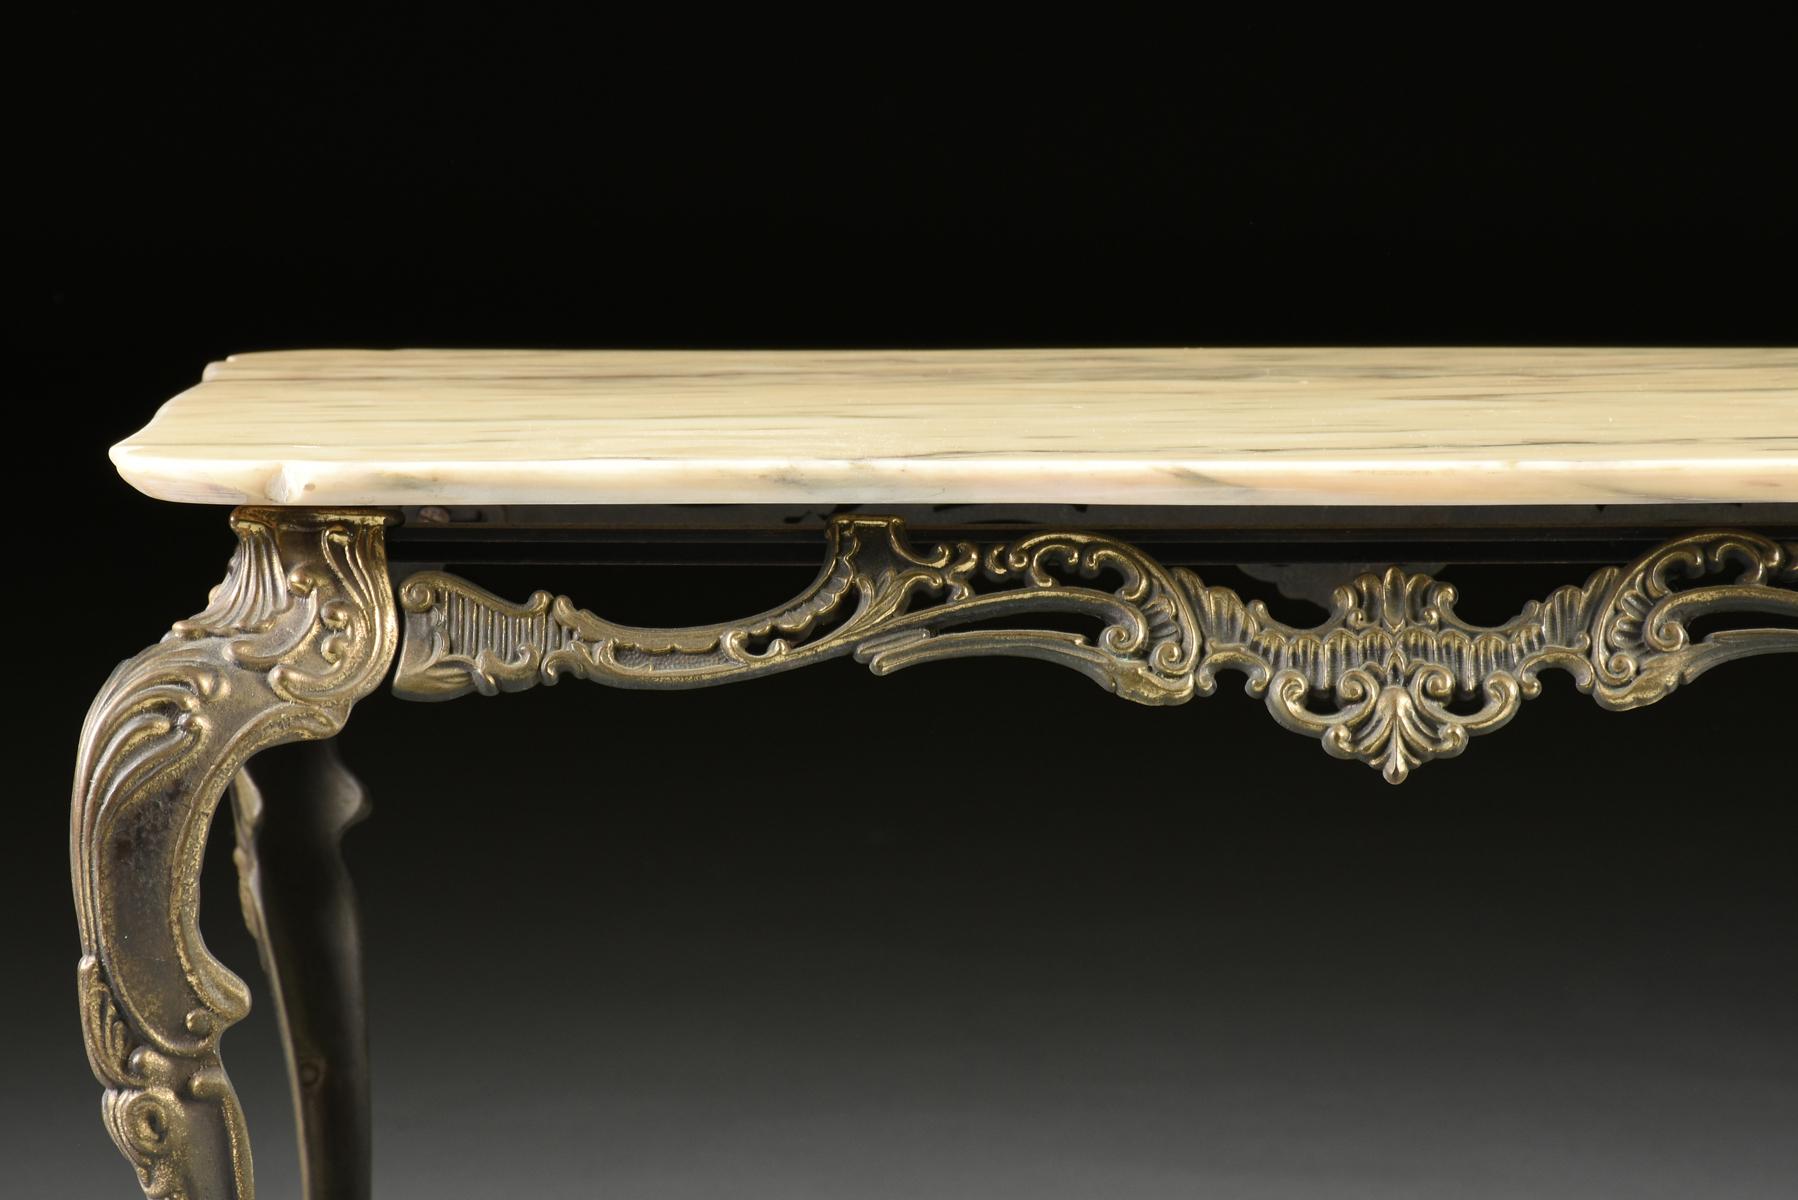 A ROCOCO REVIVAL MARBLE TOP GILT BRASS COFFEE TABLE, EARLY/MID 20TH CENTURY, the serpentine edge - Image 5 of 9